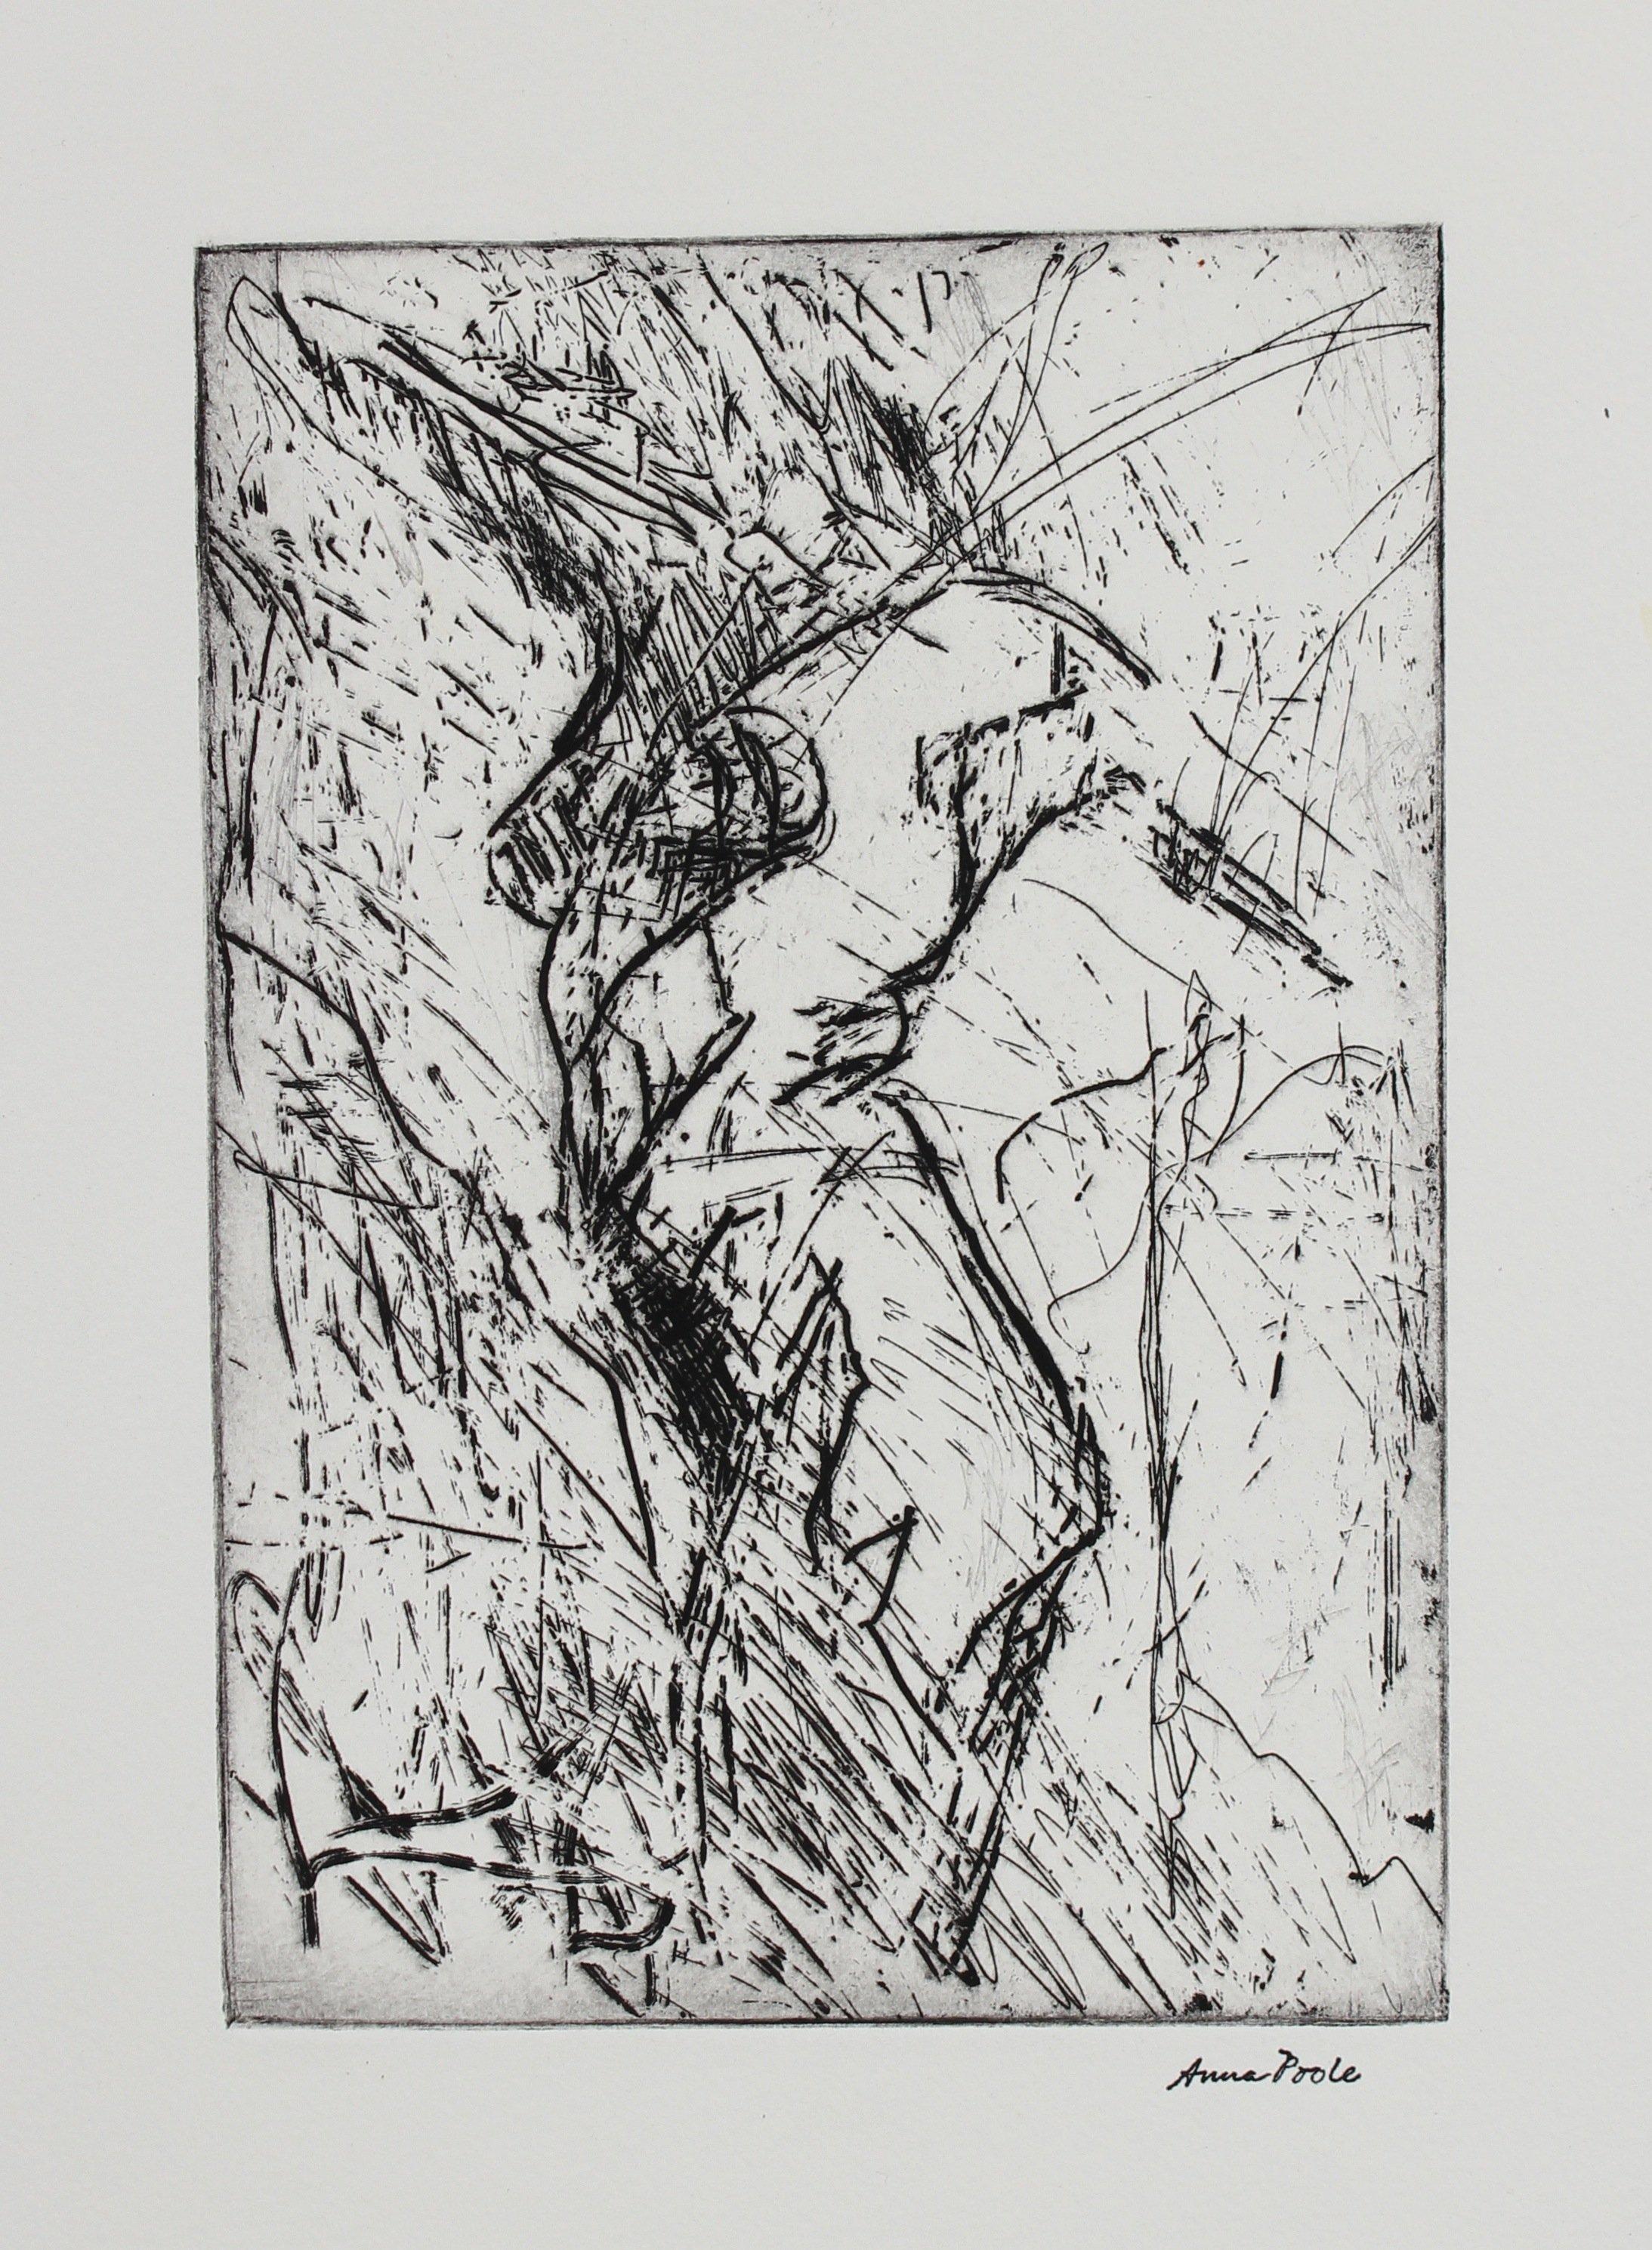 Figurative Torso Deconstruction Late 20th Century Monochromatic Etching - Print by Anna Poole